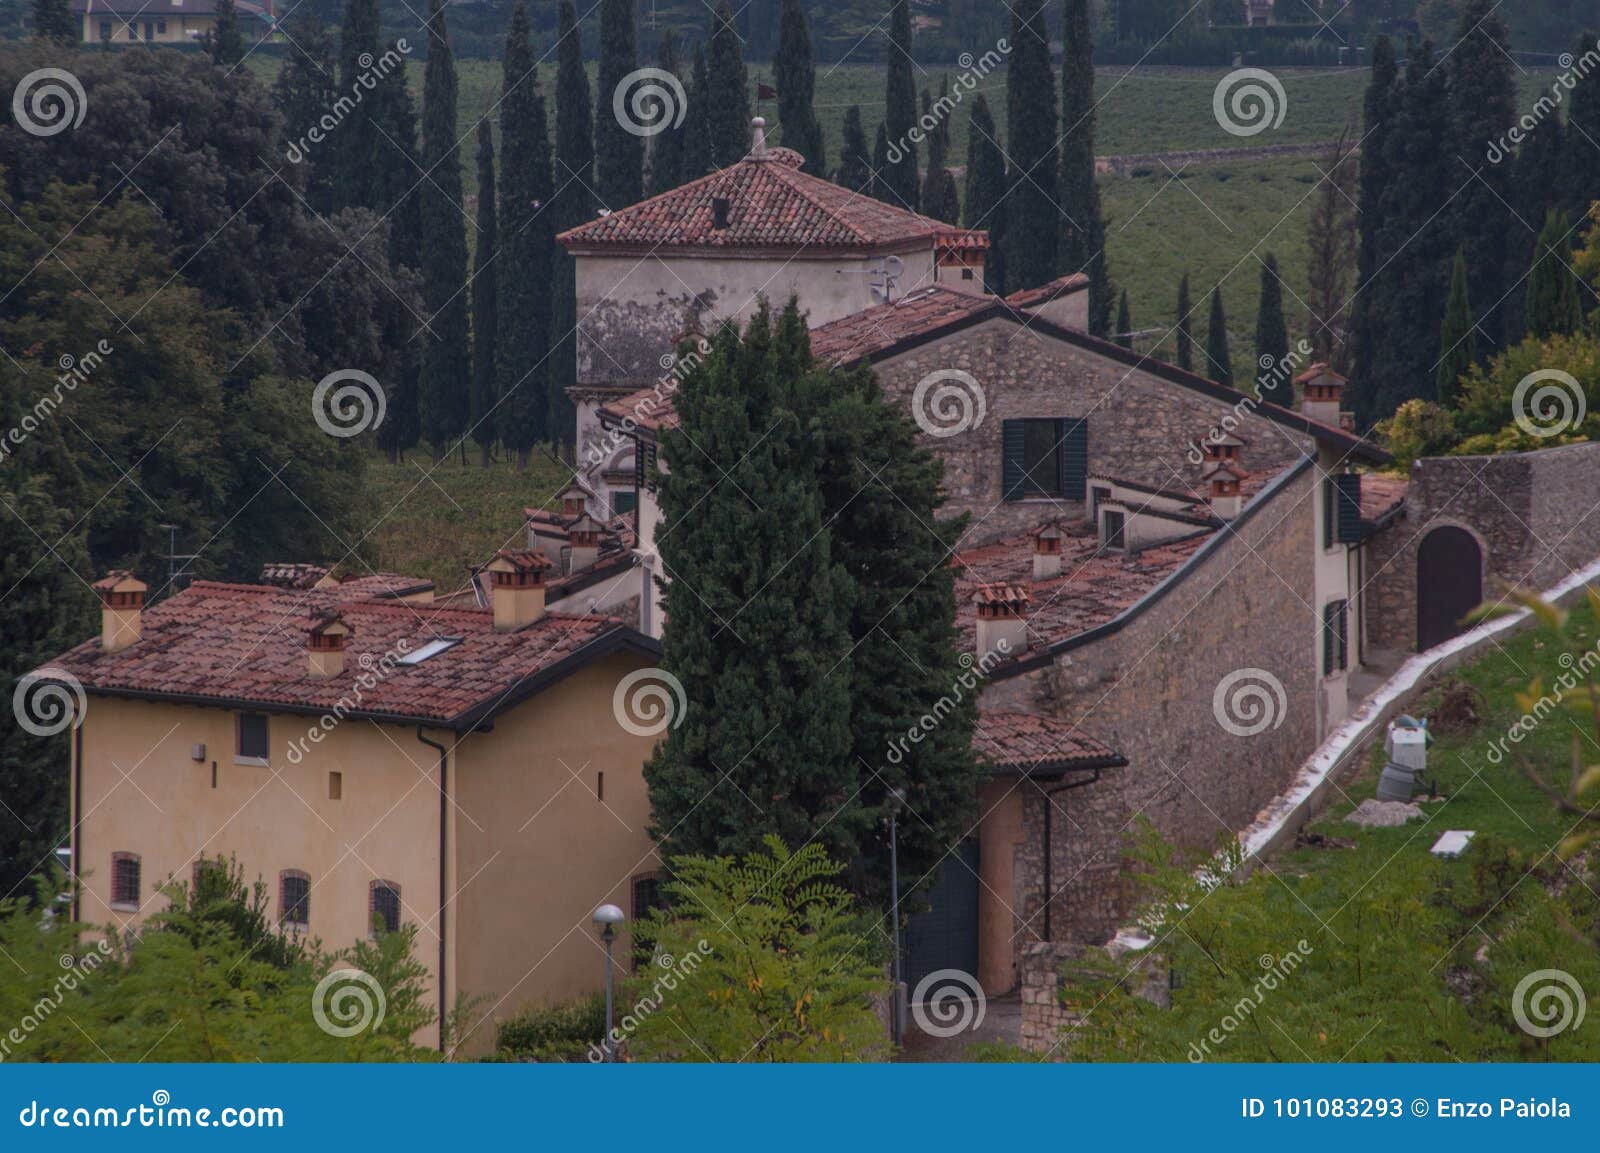 Country Cottage In Italy Stock Image Image Of Food 101083293